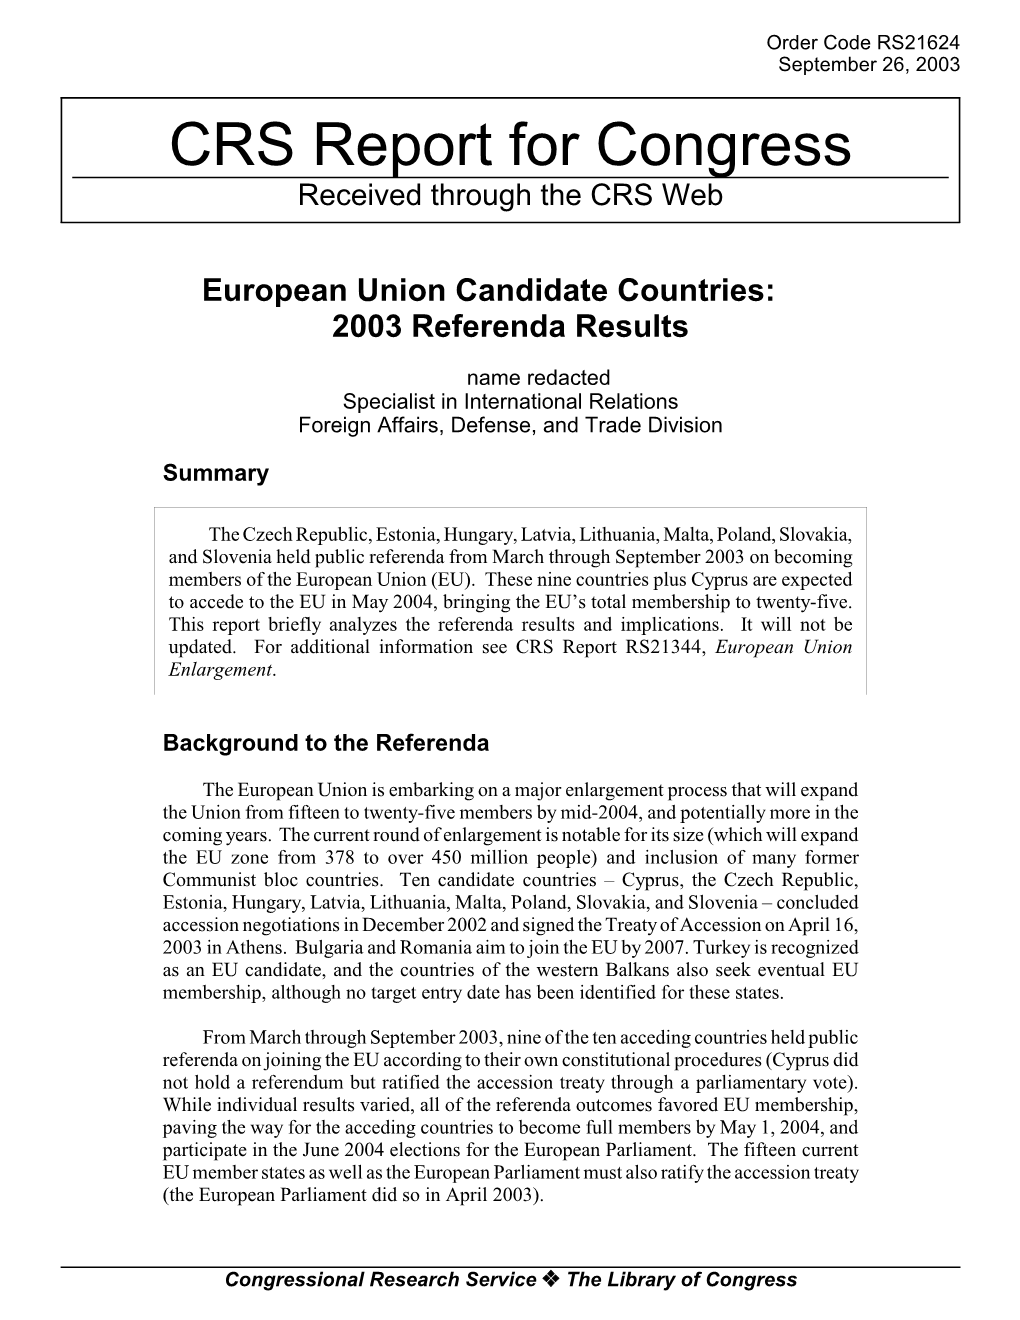 European Union Candidate Countries: 2003 Referenda Results